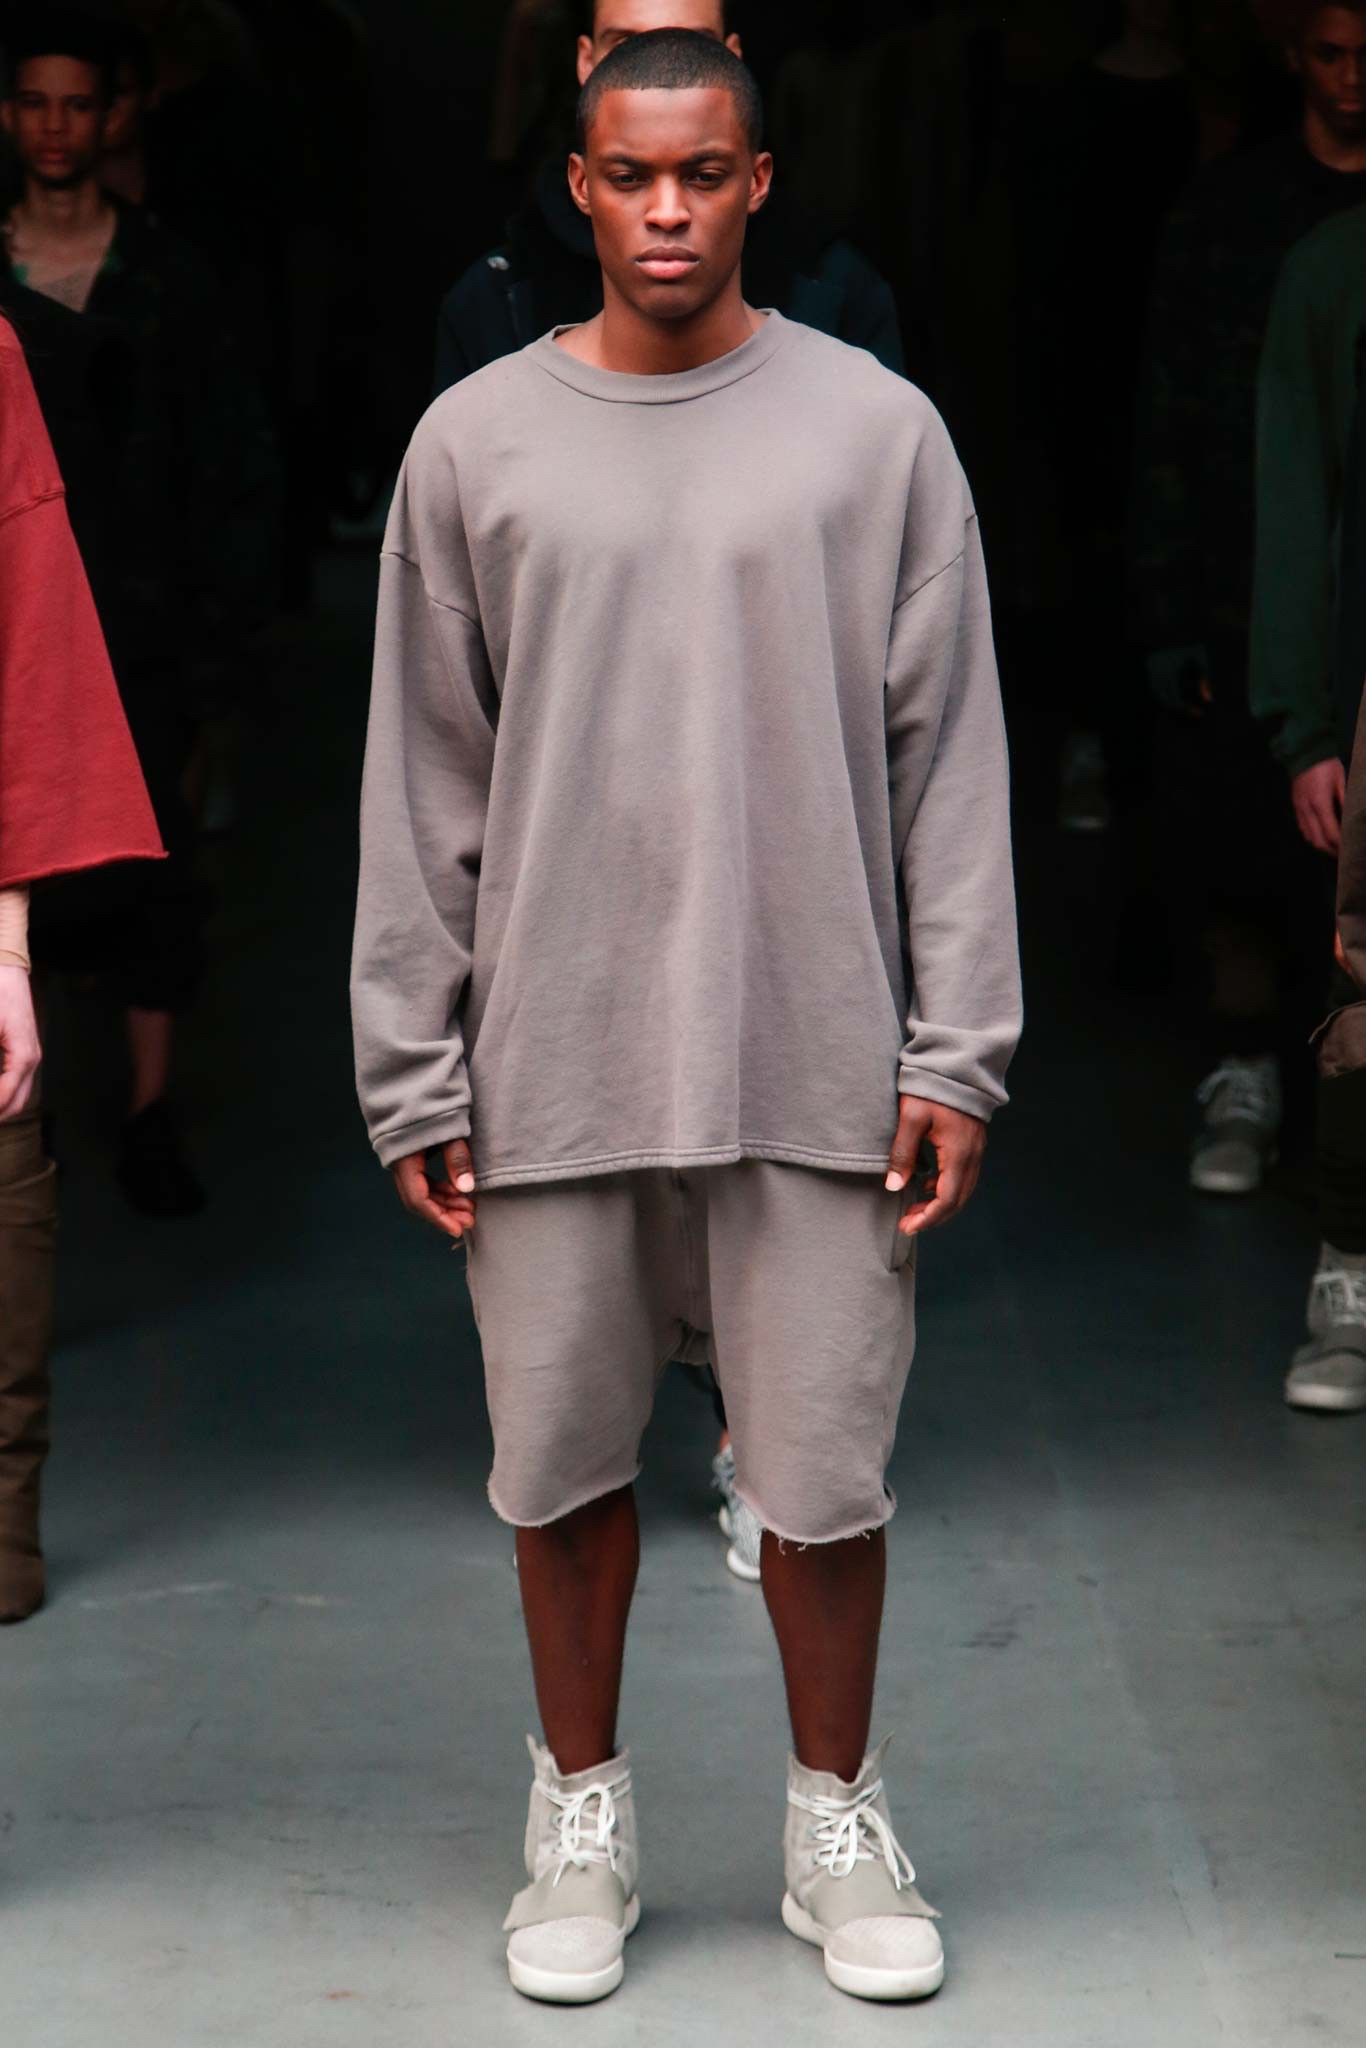 Kanye West for Adidas Fall/Winter 2015 Collection: Yeezy ...